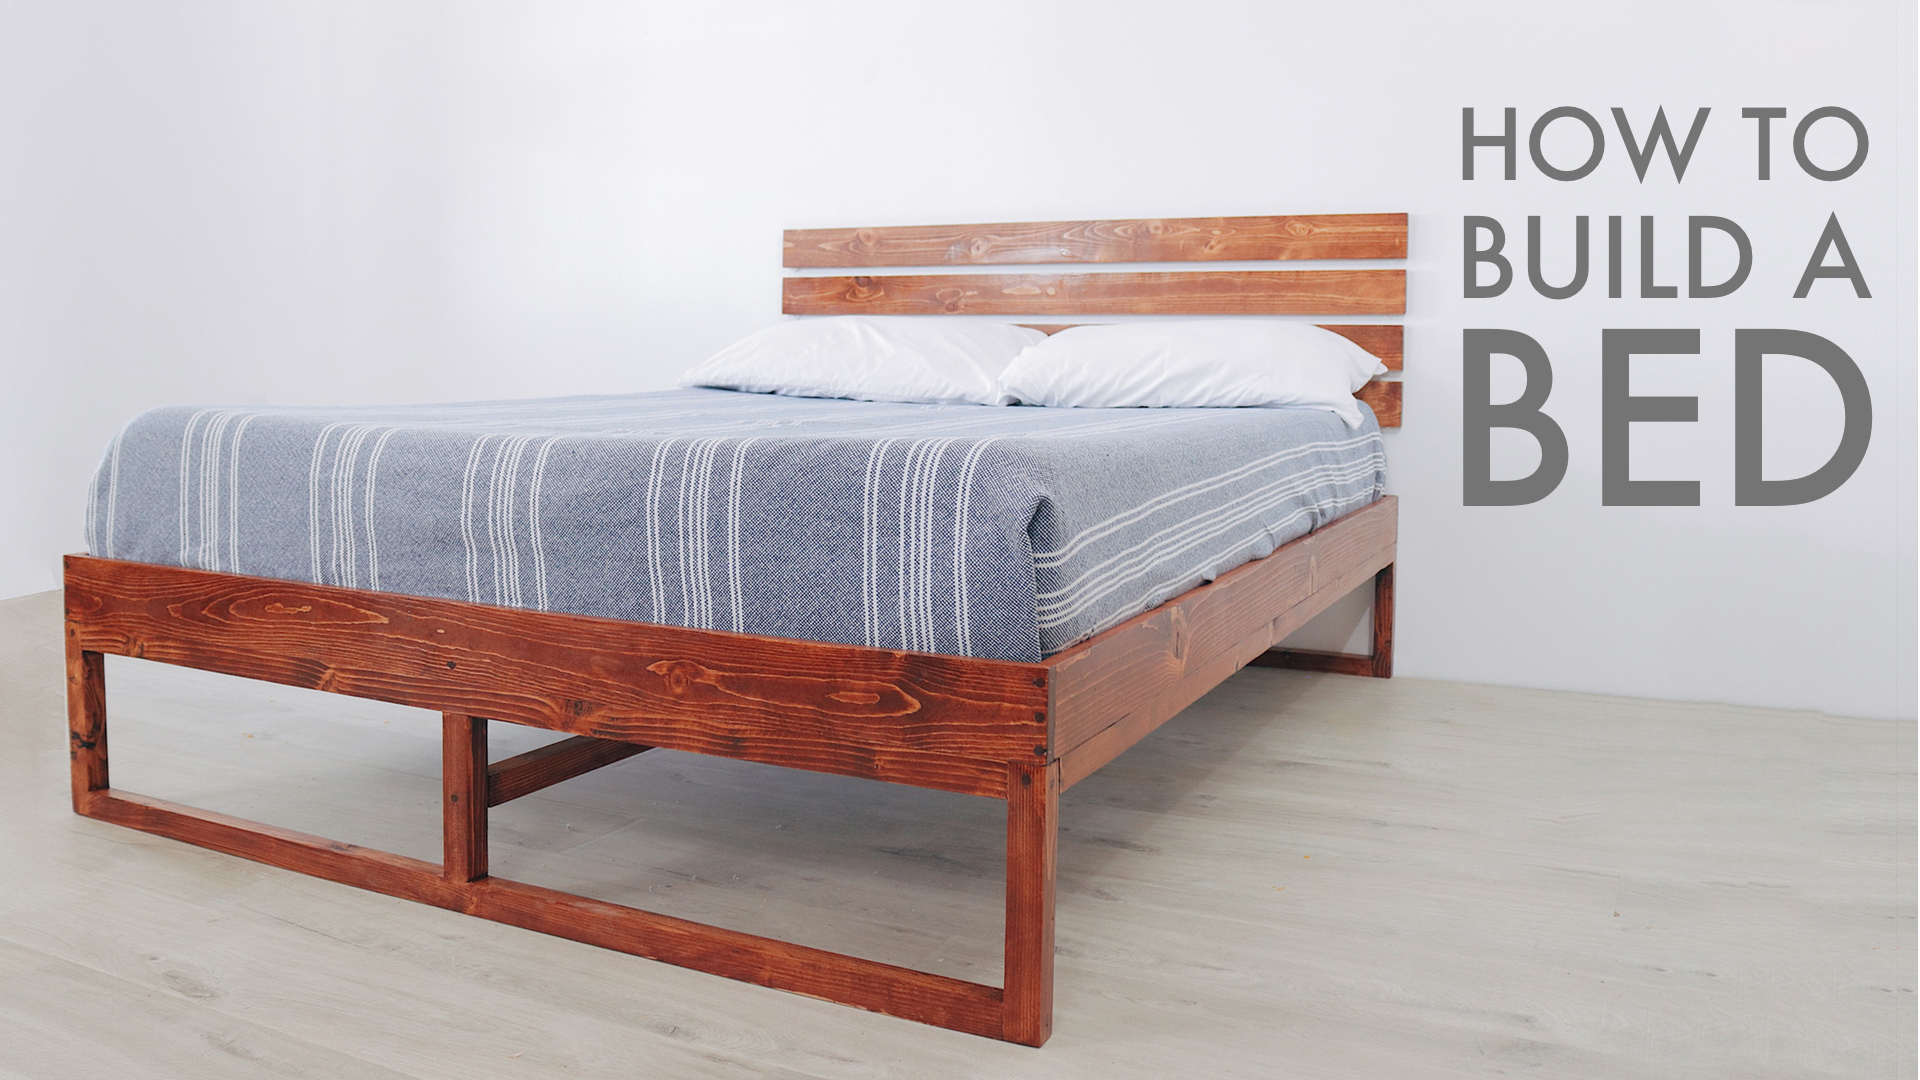  How to build a simple DIY Bed by: Mike Montgomery | Modern Builds 